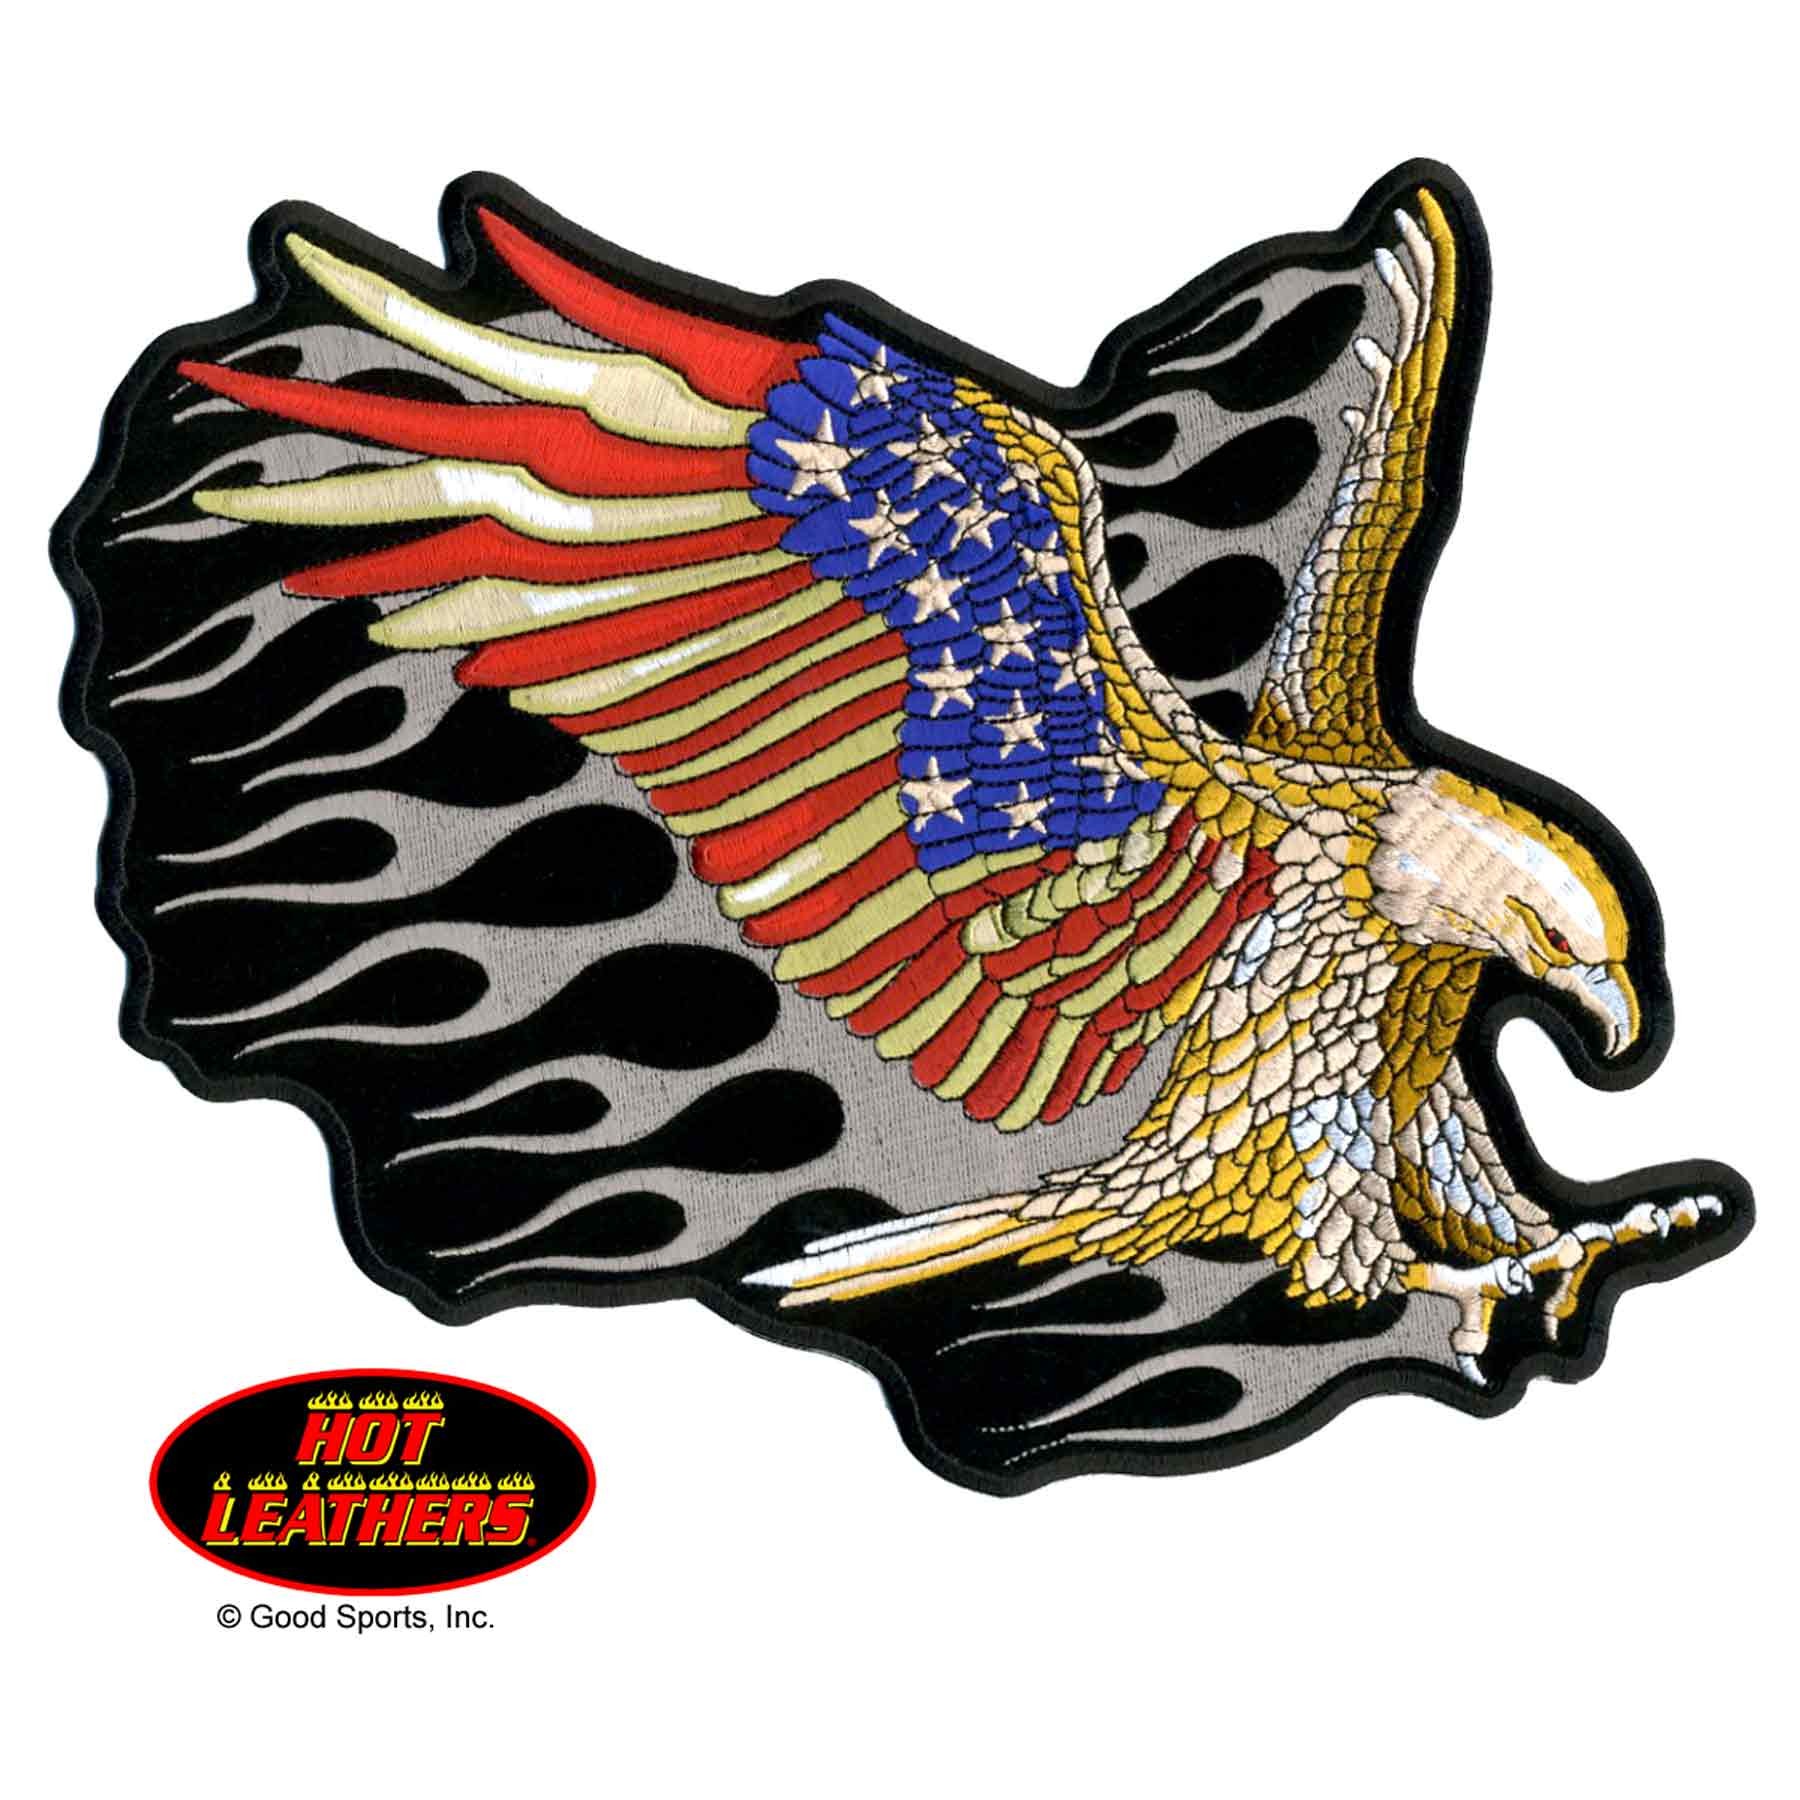 clip art american flag with eagle - photo #36